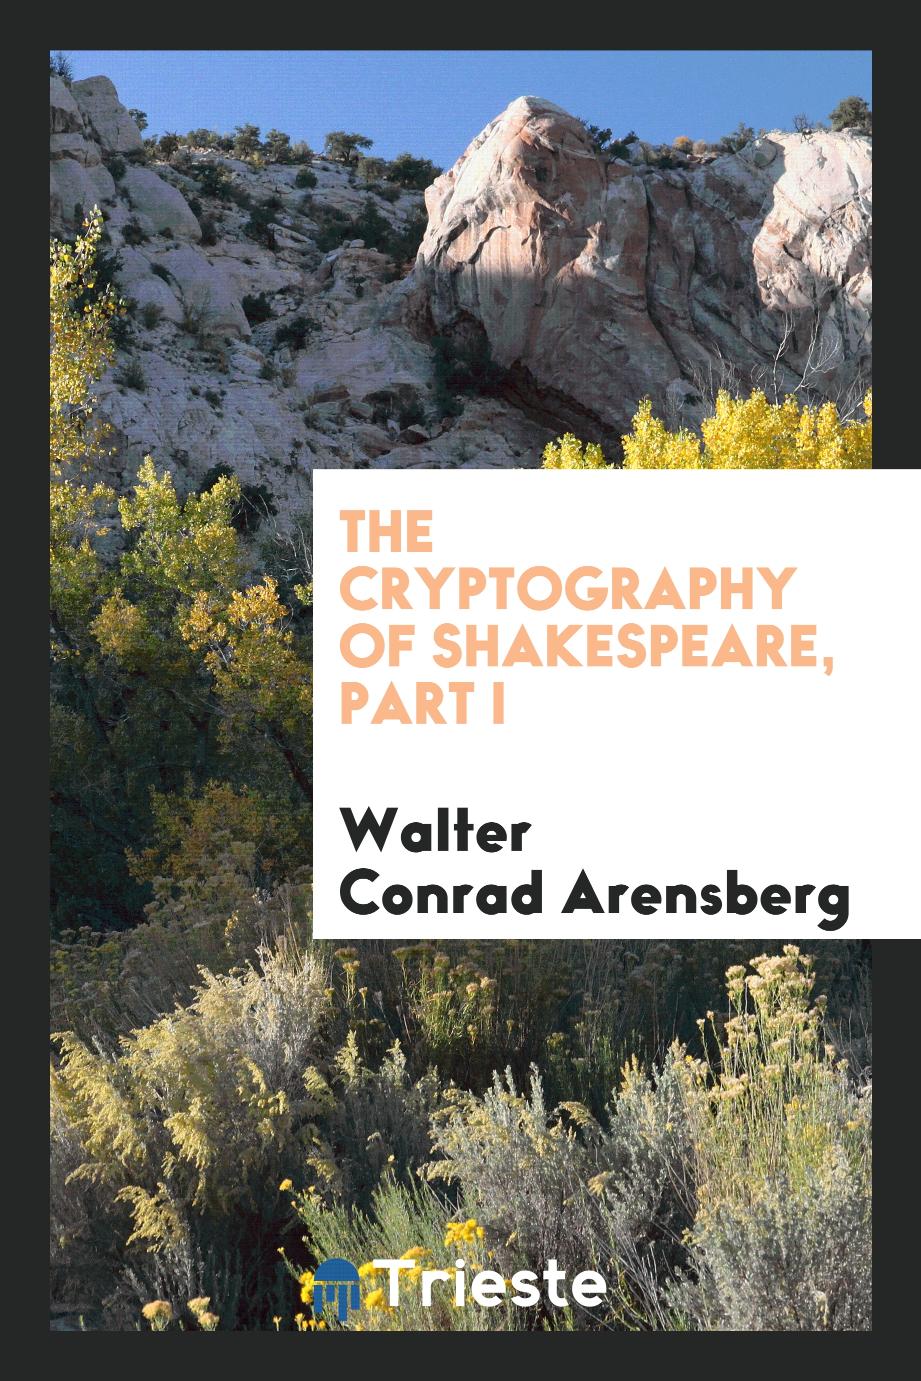 The Cryptography of Shakespeare, Part I